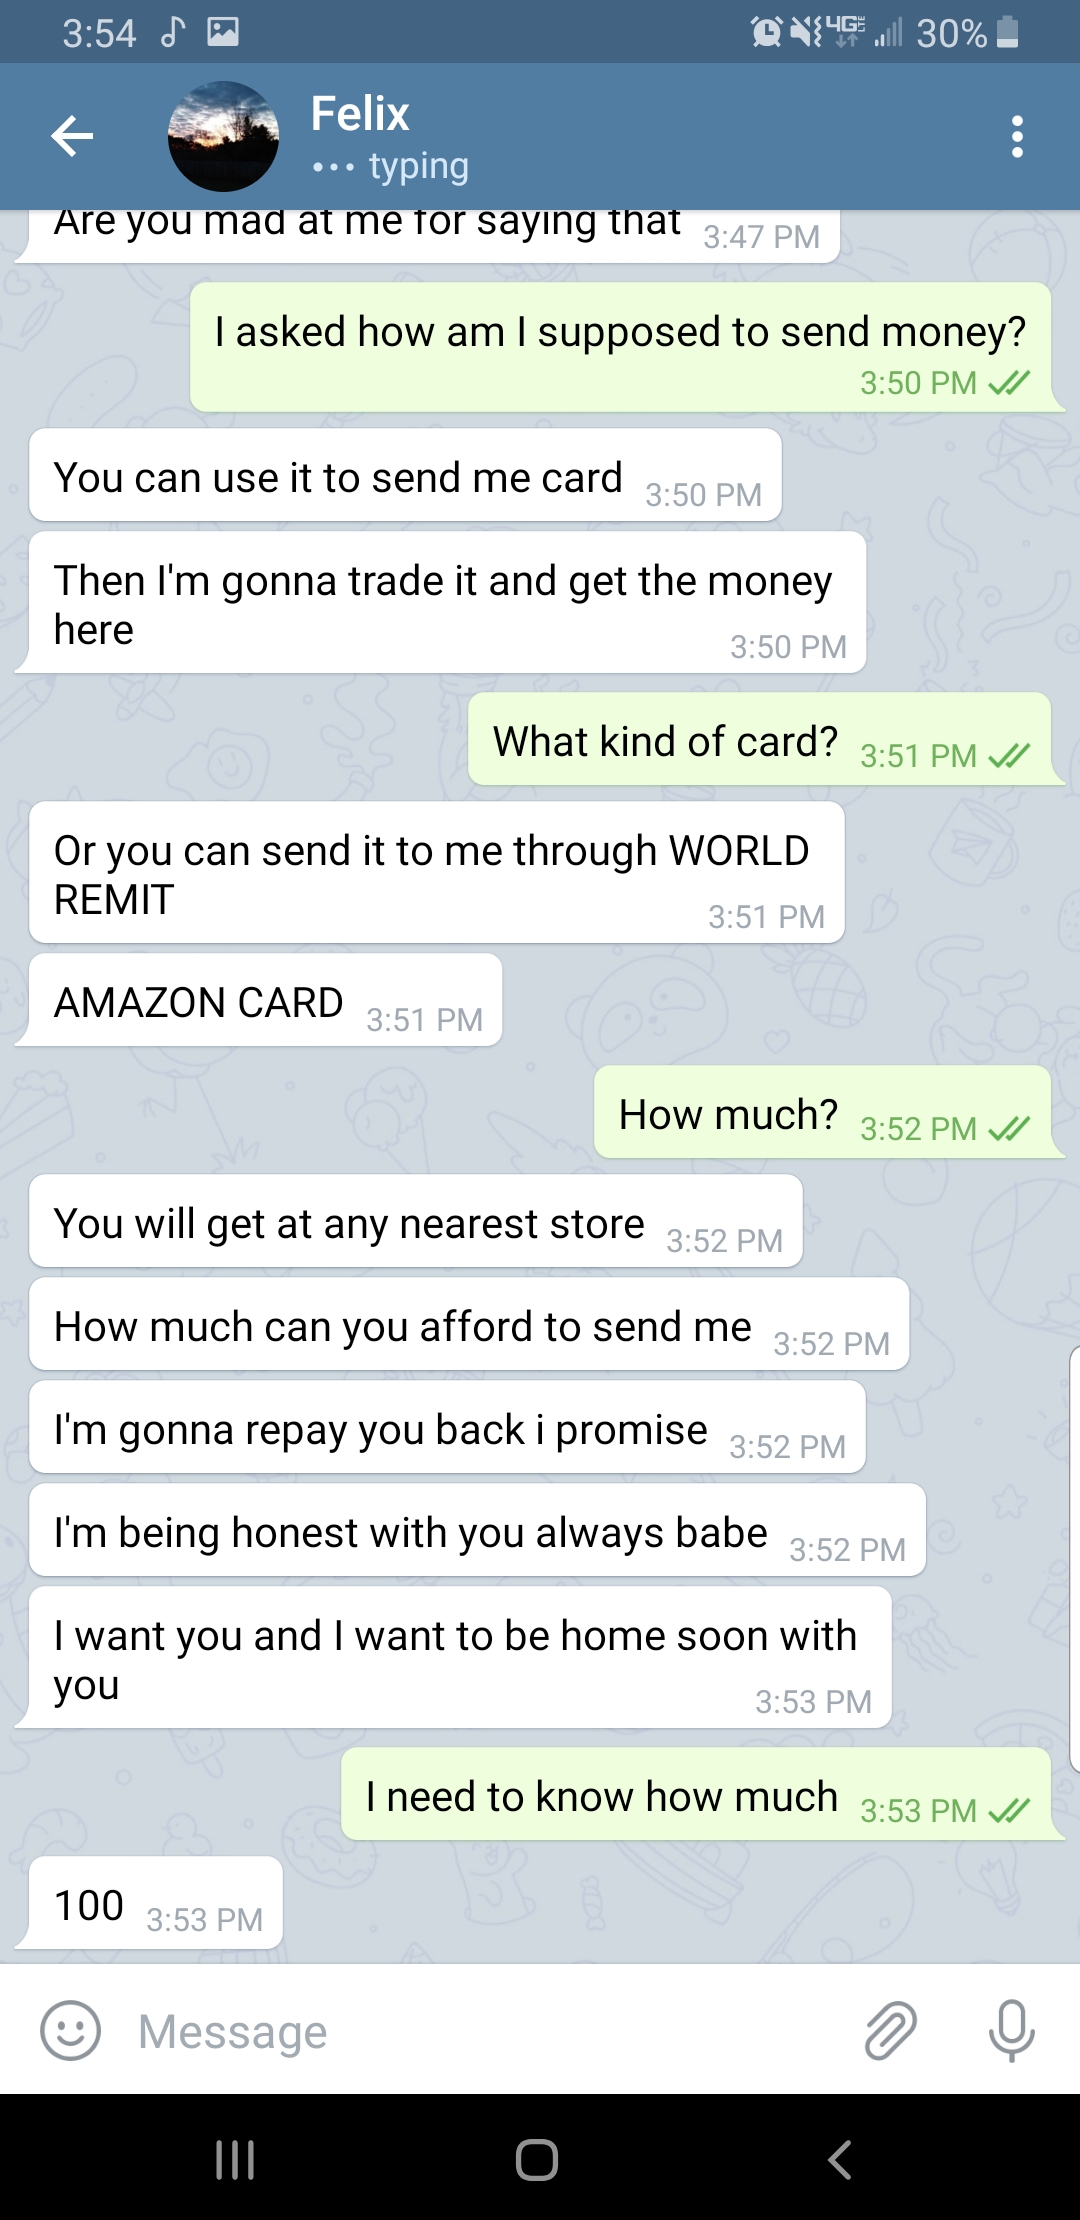 screenshot - 30% Felix typing Are you mad at me for staying that I asked how am I supposed to send money? 25 You can use it to send me card 50 Pm Then I'm gonna trade it and get the money here What kind of card? Or you can send it to me through World Remi